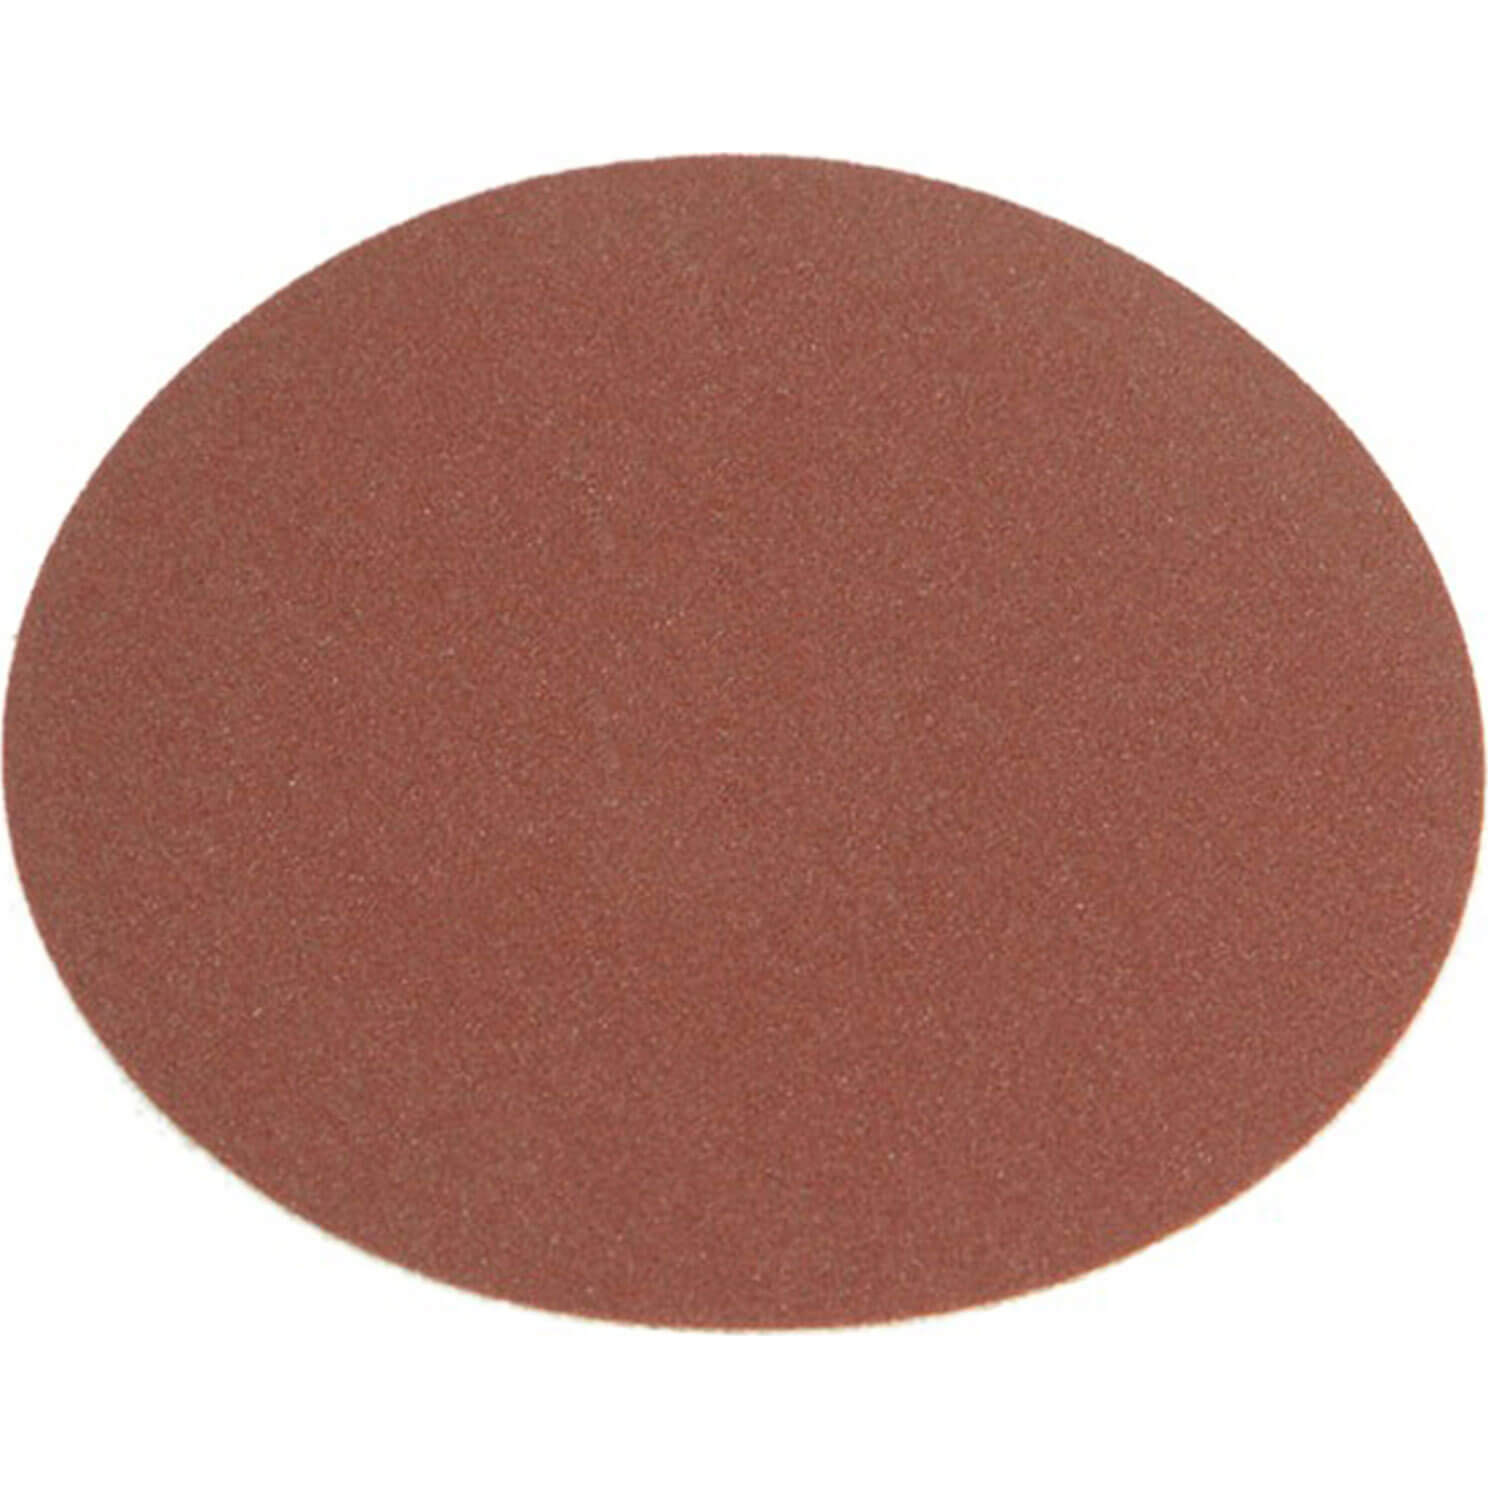 Faithfull Red Pressure Sensitive Self Adhesive 150mm Abrasive Discs Assorted Grit Pack of 5